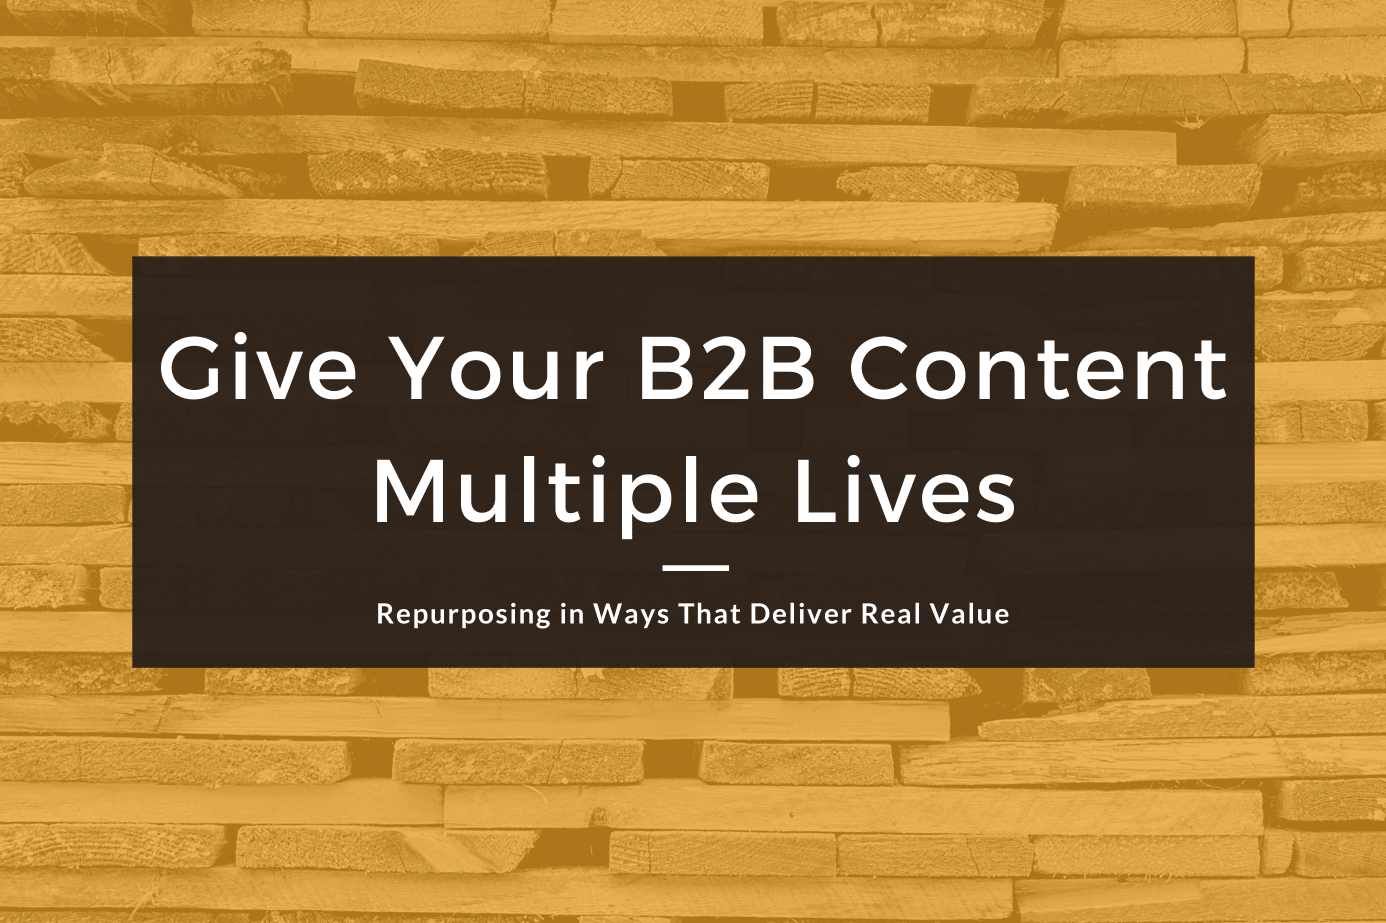 Repurposing B2B Content: How One Asset Becomes Many Posts That Matter